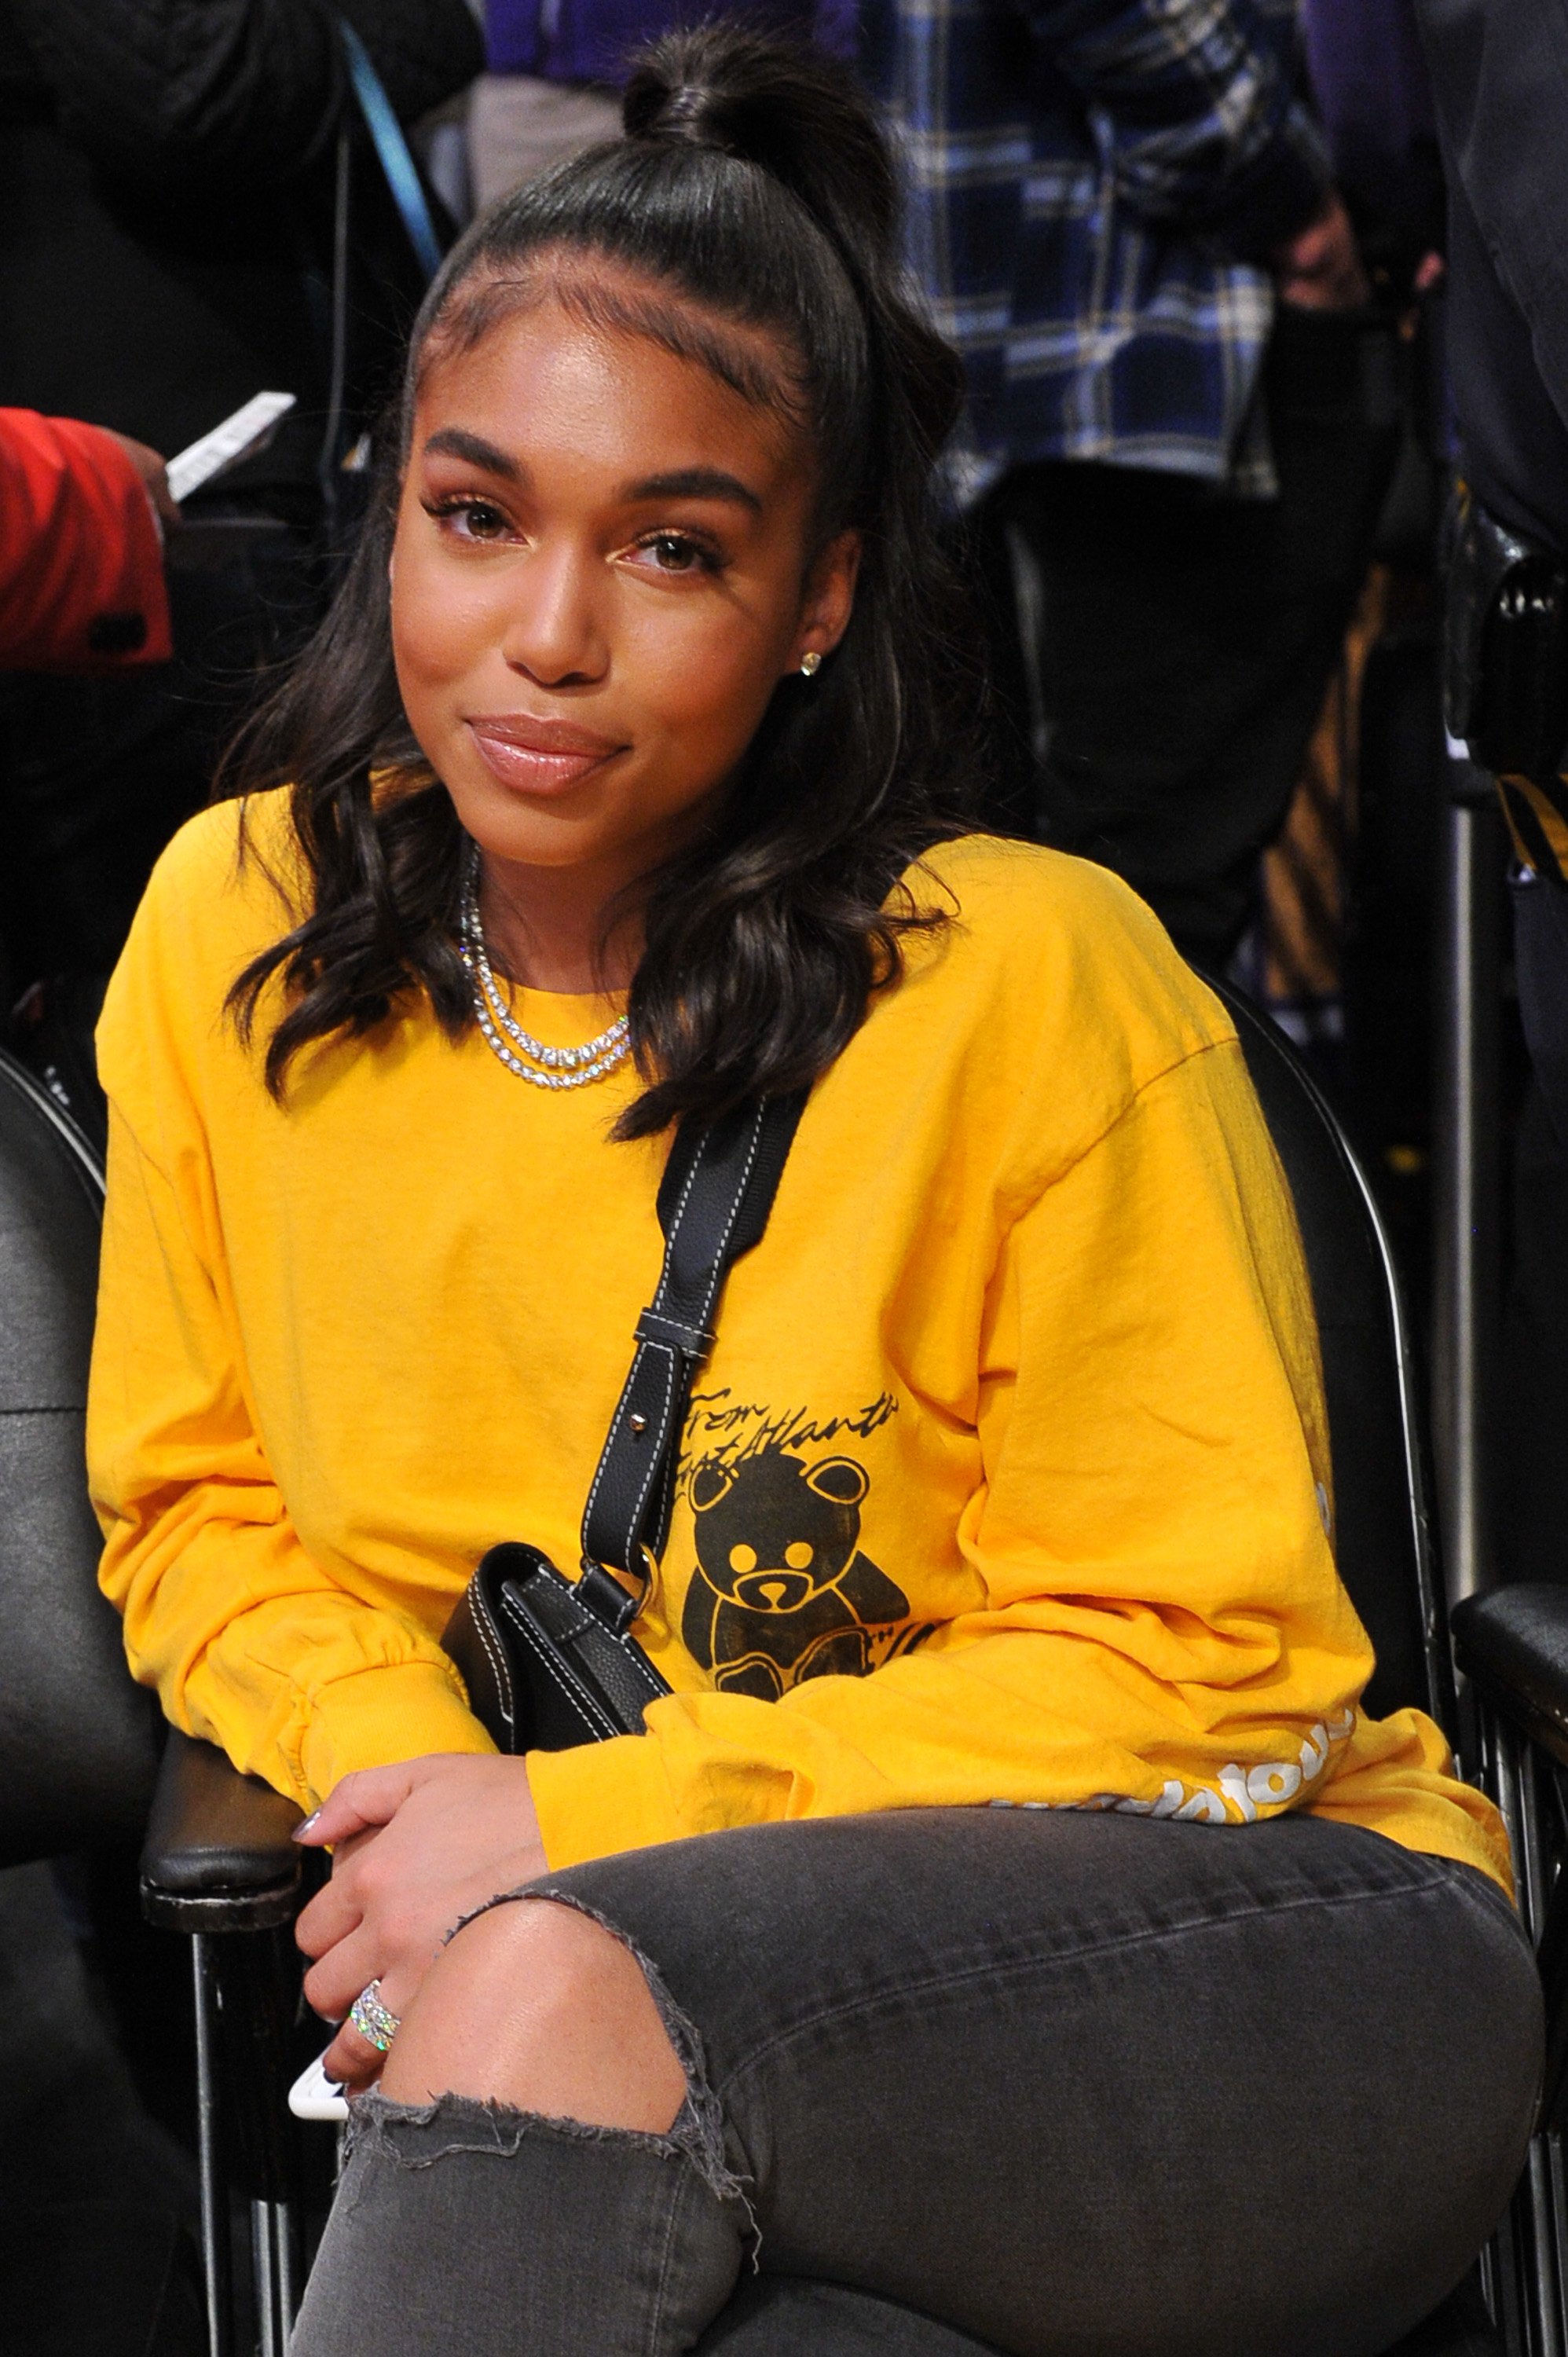 Lori Harvey at Staples Center for a basketball game between the Los Angeles Lakers and the Sacramento Kings on December 30, 2018 in Los Angeles, California | Photo: Getty Images